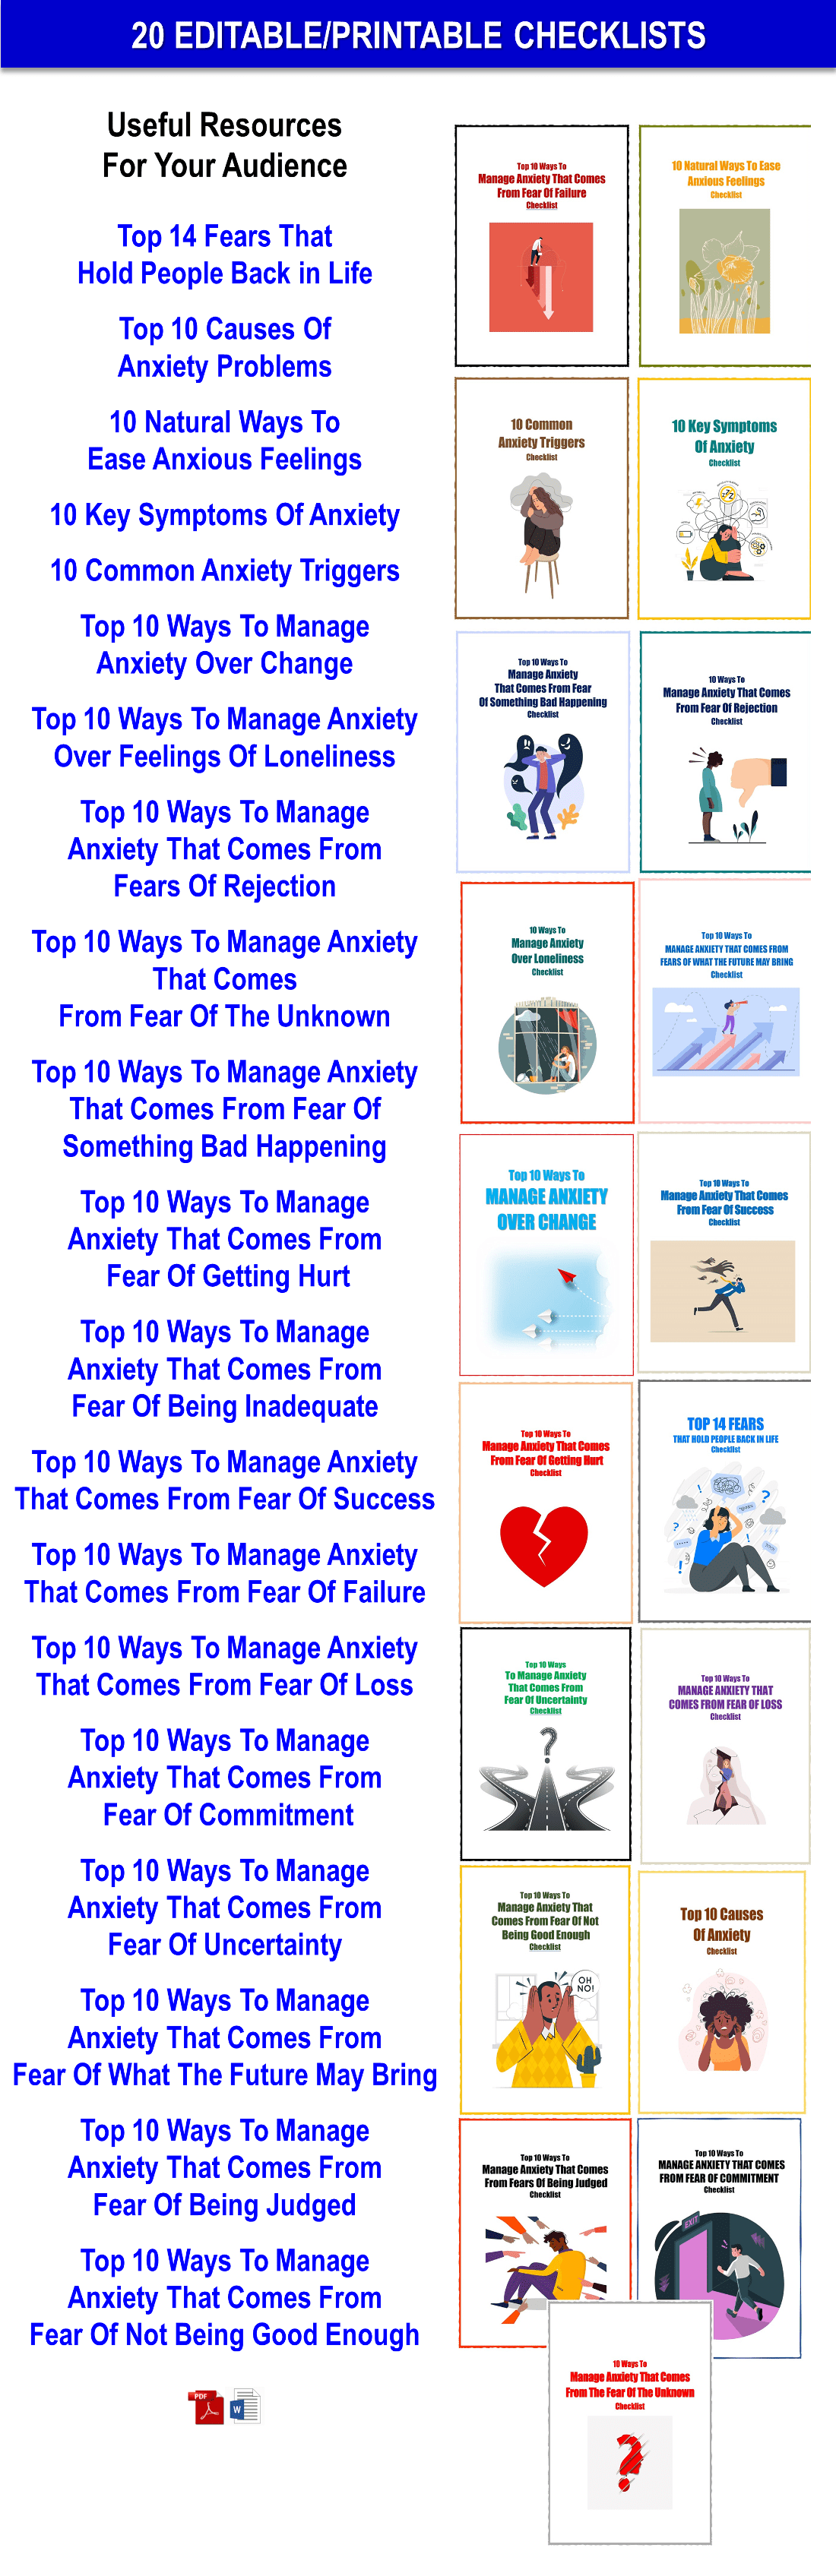 Top 14 Fears That Hold People Back in Life And Managing The Anxiety Content with PLR Rights